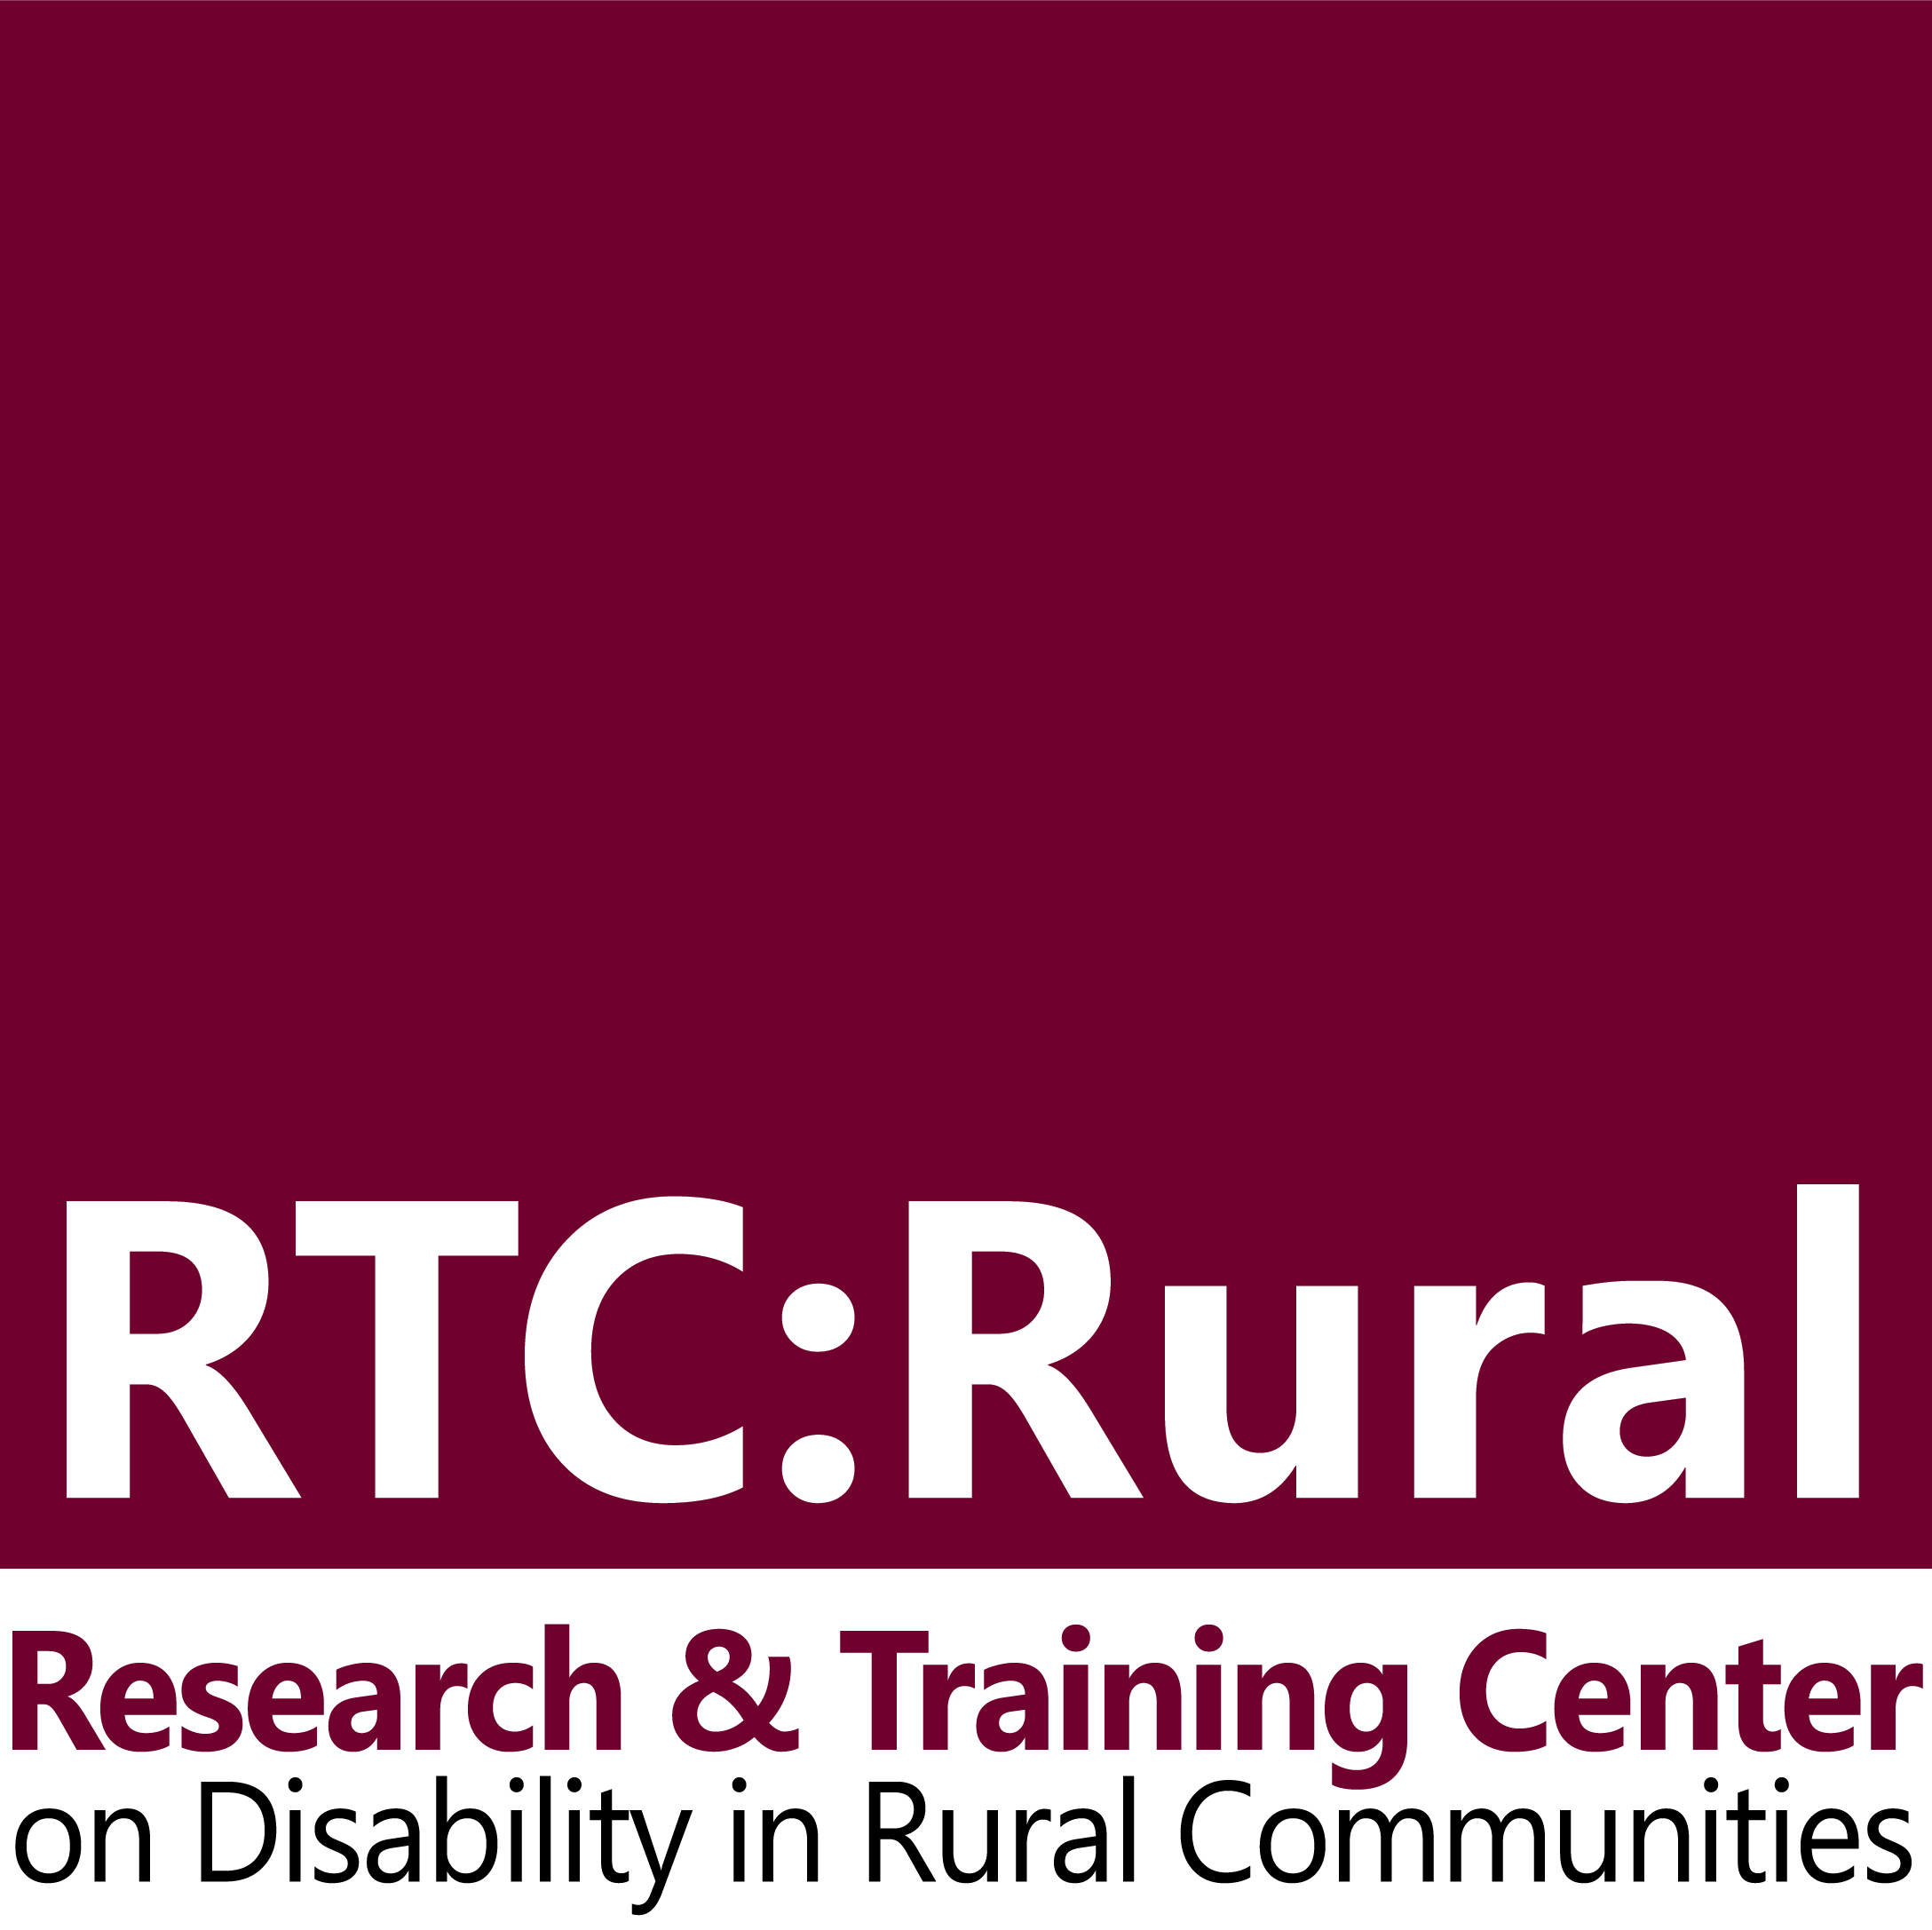 RTC:Rural. Research and Training Center on Disability in Rural Communities